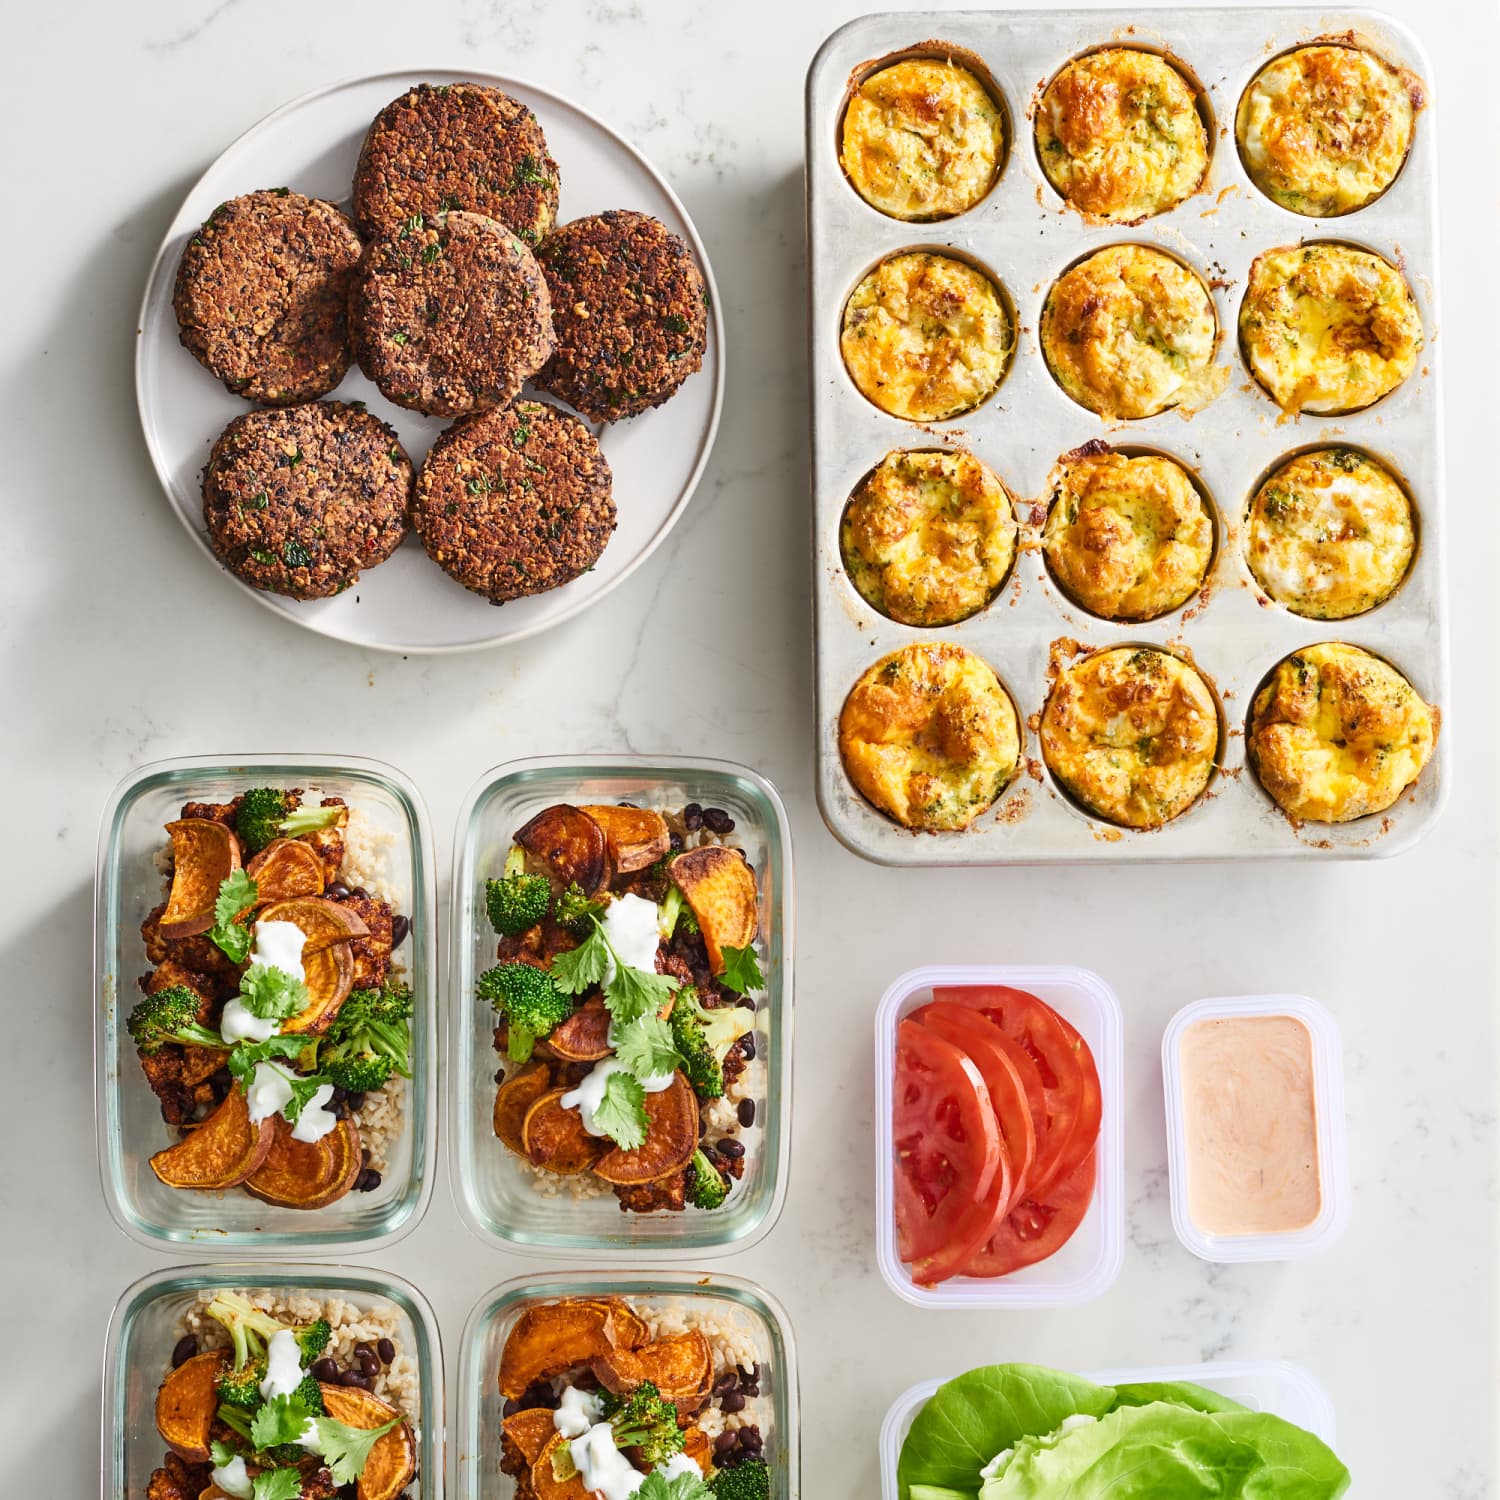 Here Are 8 Week's Worth of Plant-Based Meal Plans